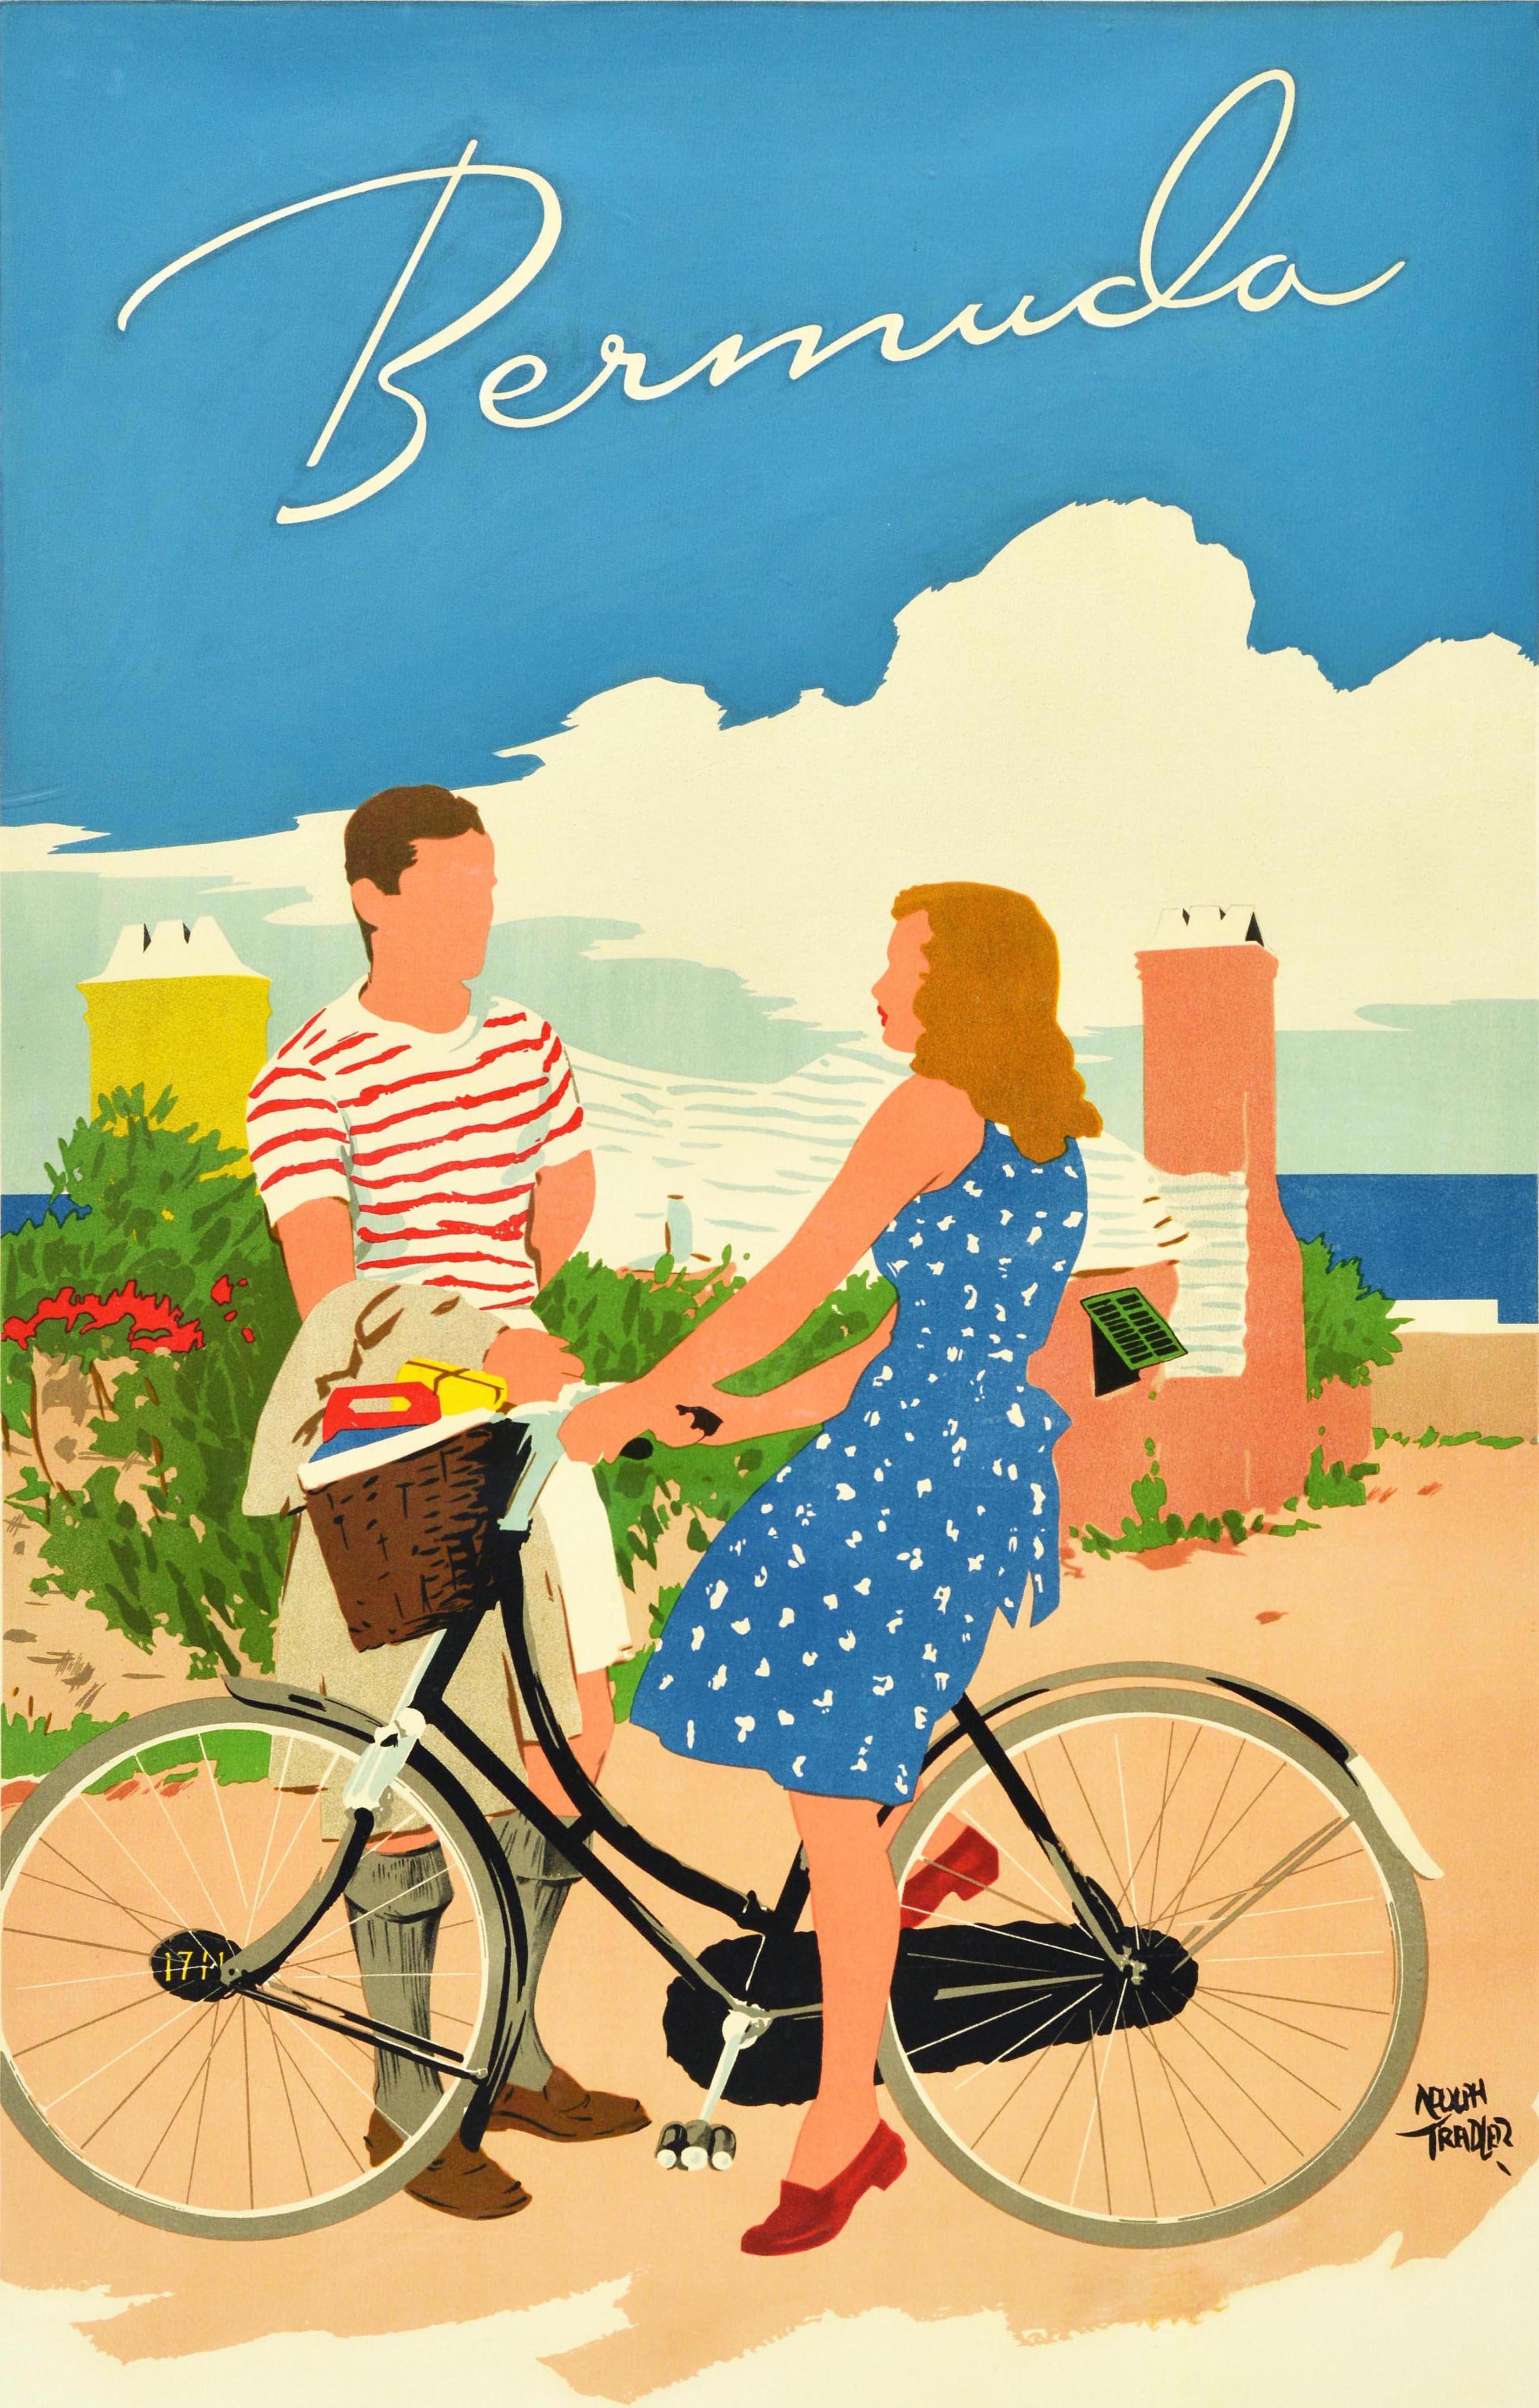 Original vintage travel poster for Bermuda featuring a colourful illustration by the American artist Adolph Treidler (1886-1981) depicting a lady wearing a blue and white summer dress and standing on her bicycle to talk with a man in a red and white